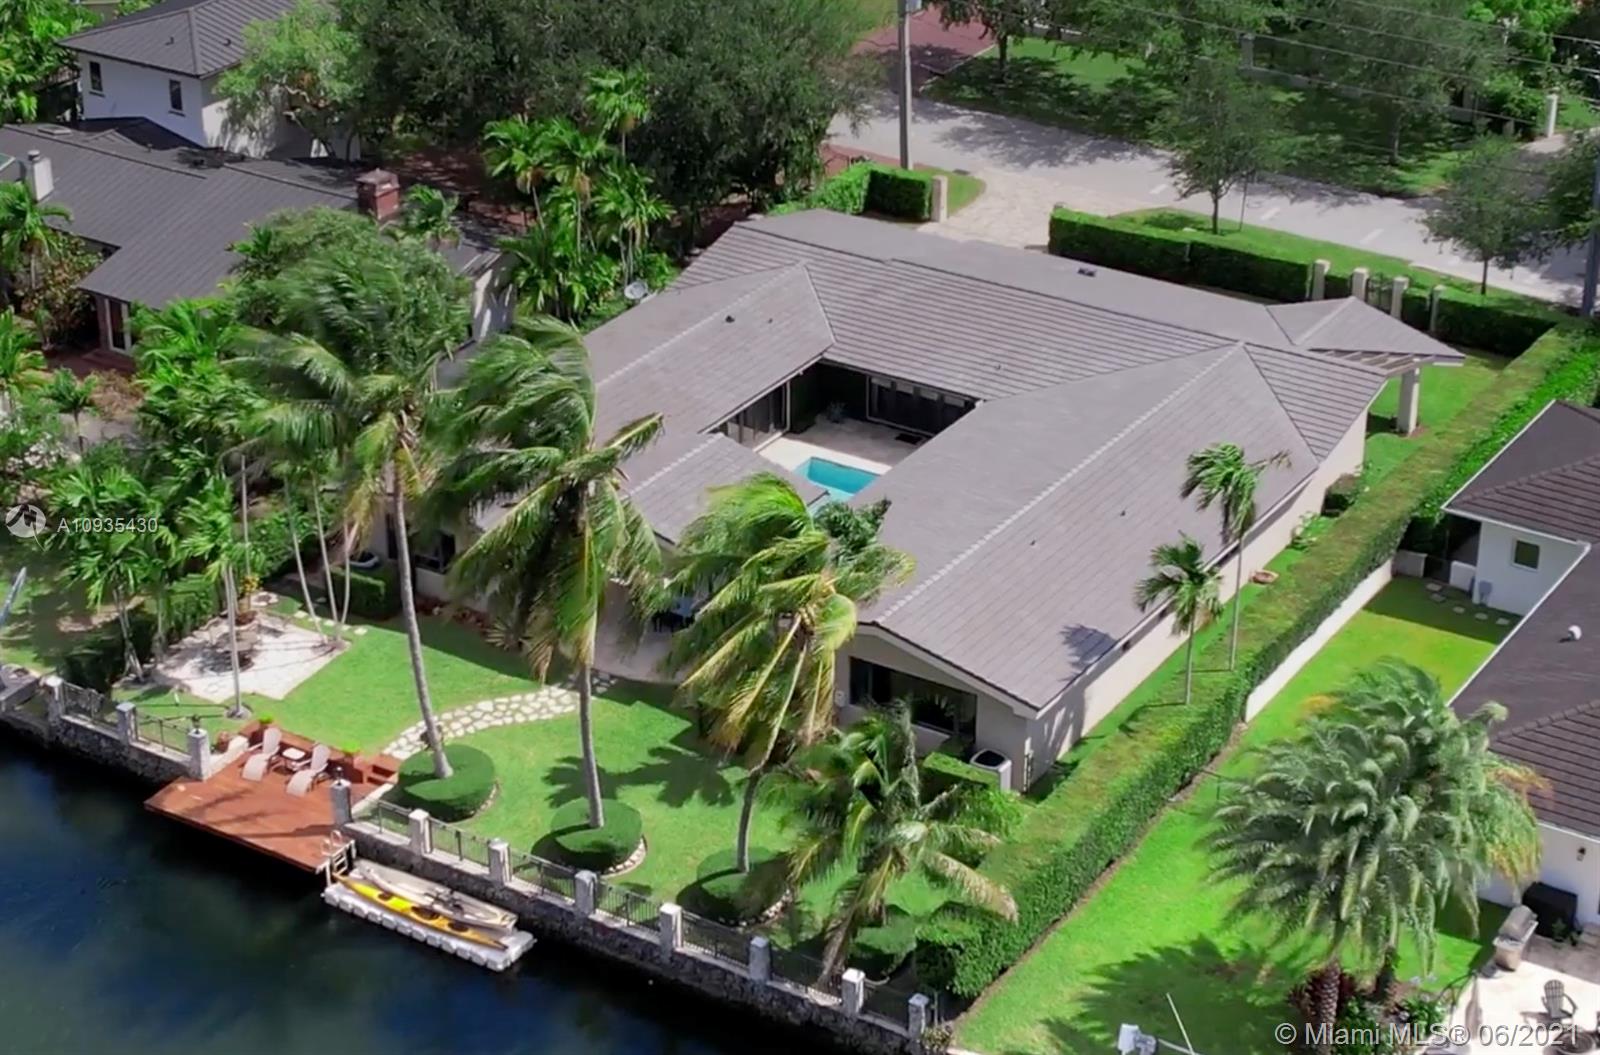 This gorgeous home is on the Coral Gables Waterway with its own dock and is just a 15-minute boat ride to beautiful Biscayne Bay. This gated property is close to shops of Merrick Park, less than 3 miles from exclusive shopping, international cuisine and entertainment of Miracle Mile. Close to both family-friendly Riviera Country Club and prestigious Biltmore Hotel golf course. Providing amenities such as gym, summer camp for kids, pool and many more! Outside, find plenty of entertainment space on the sun-soaked terrace just waiting to host friends and family in the sparkling pool and spa or while unwinding from a long day enjoying a meal under the covered patio.